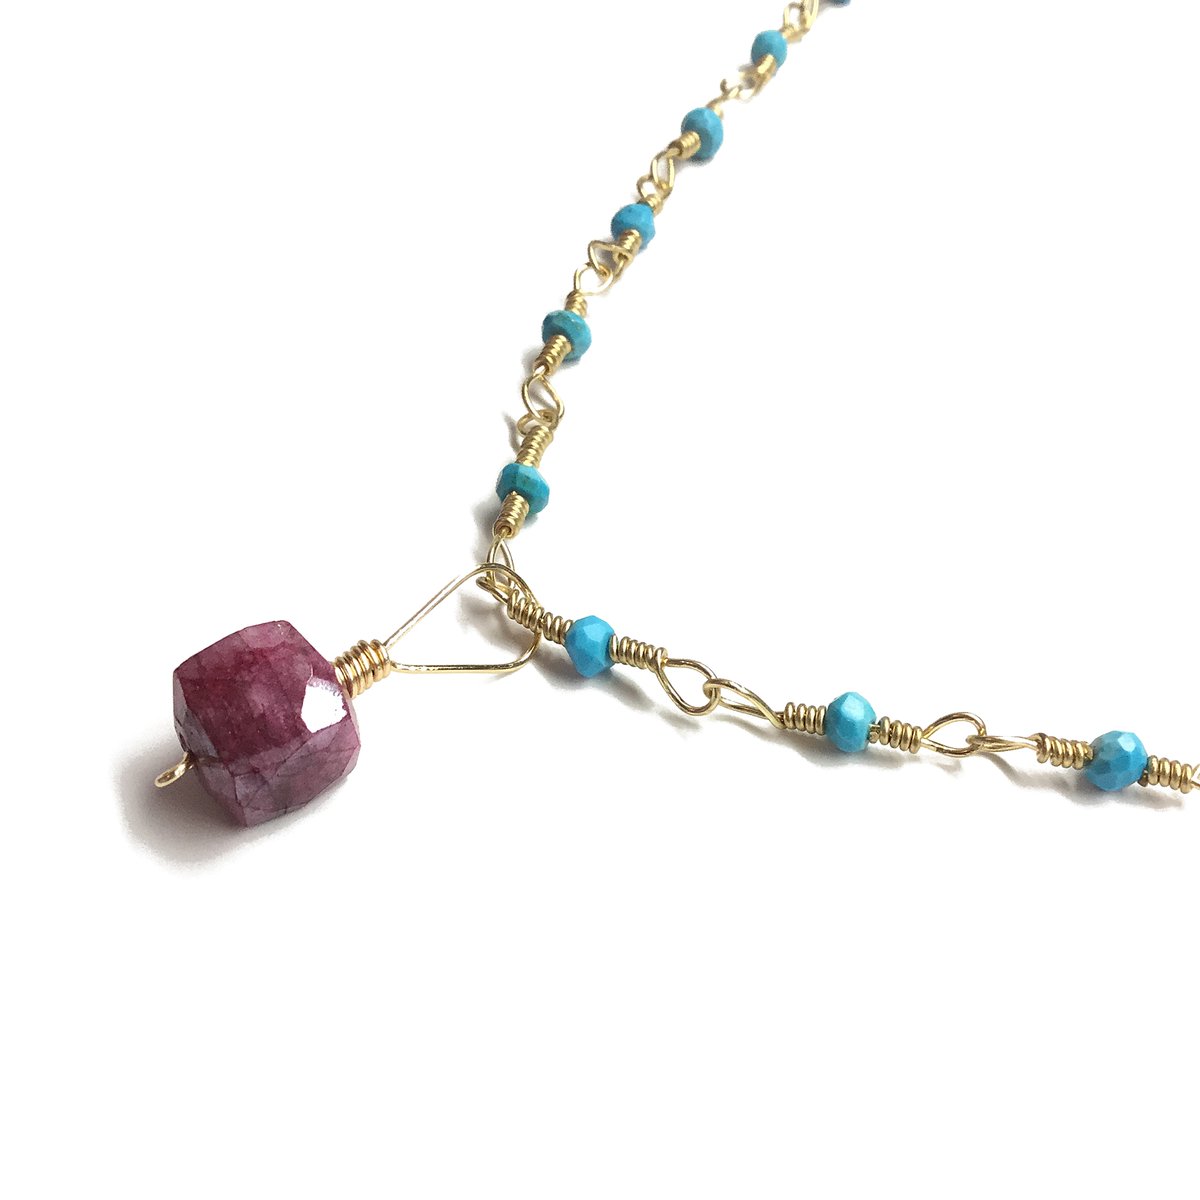 💗💗Gorgeous gemstone layering necklaces coming soon!😍 #gemstonenecklace #layeringnecklace #turquoisenecklace #rubynecklace #gemstonejewelry #etsy #etsyshop #SmallBusiness #luxeandopal